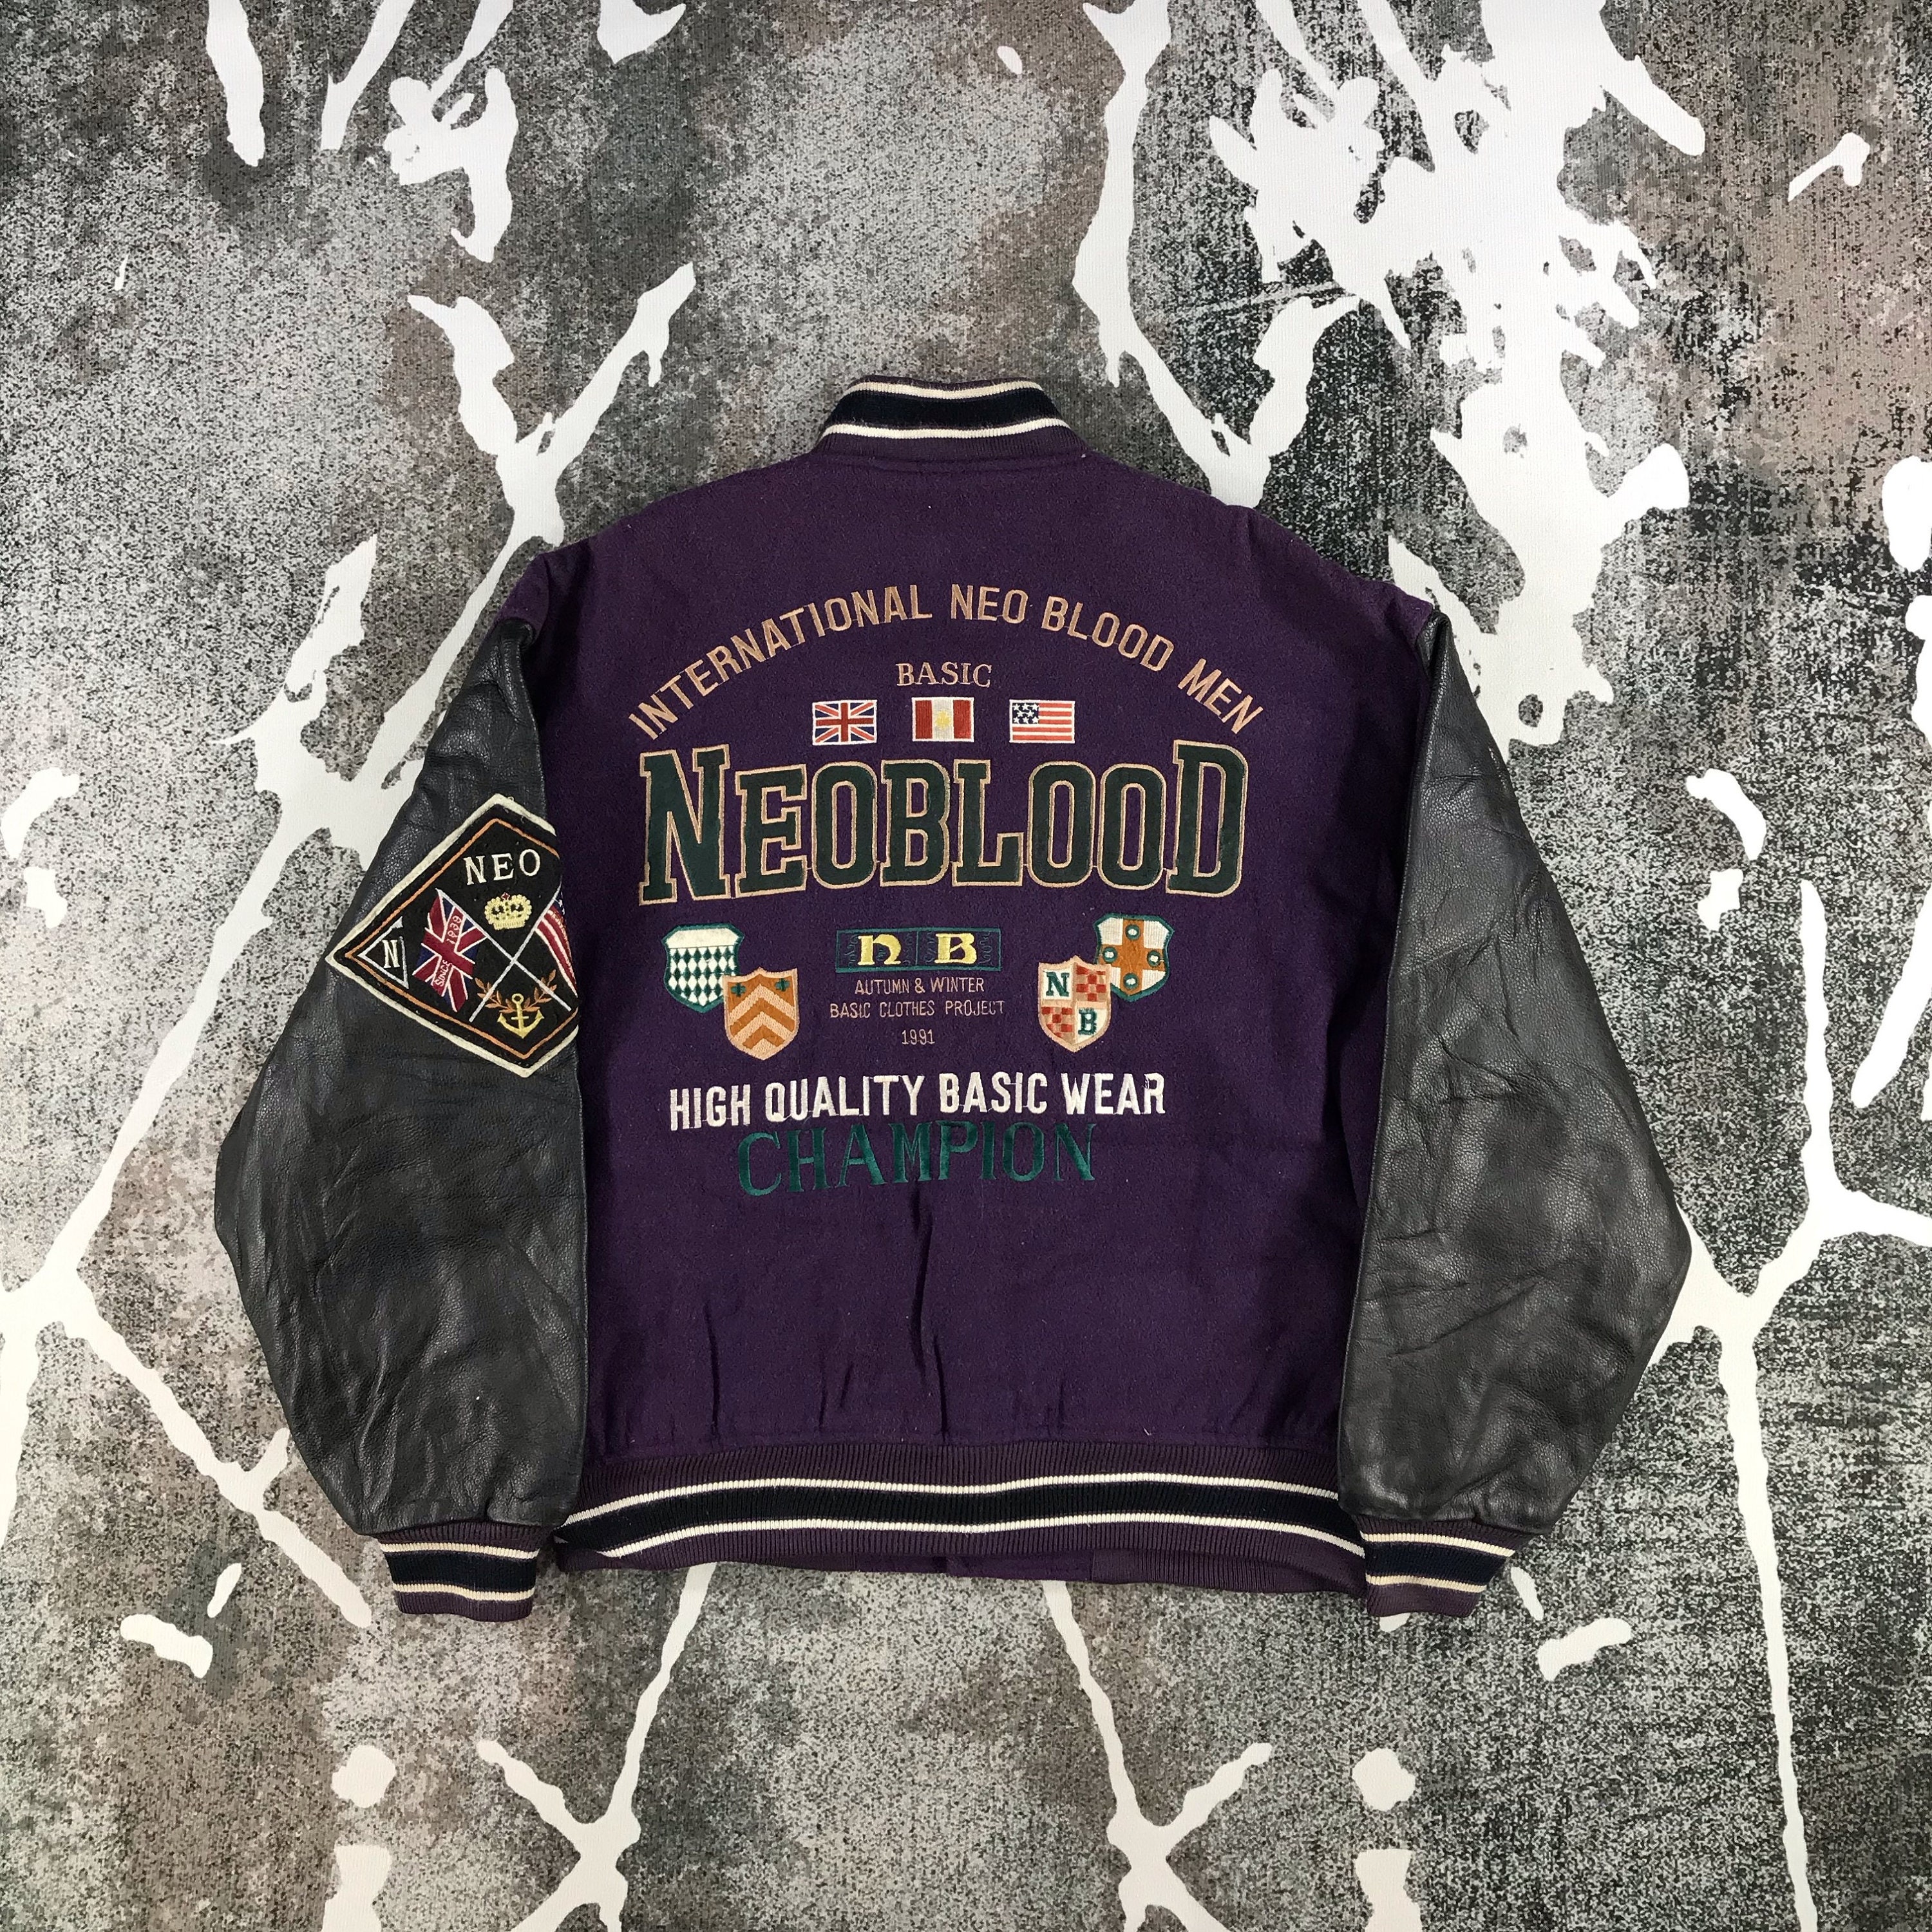 These 7 Varsity Jacket Outfits Will Make You a Street Style Champion